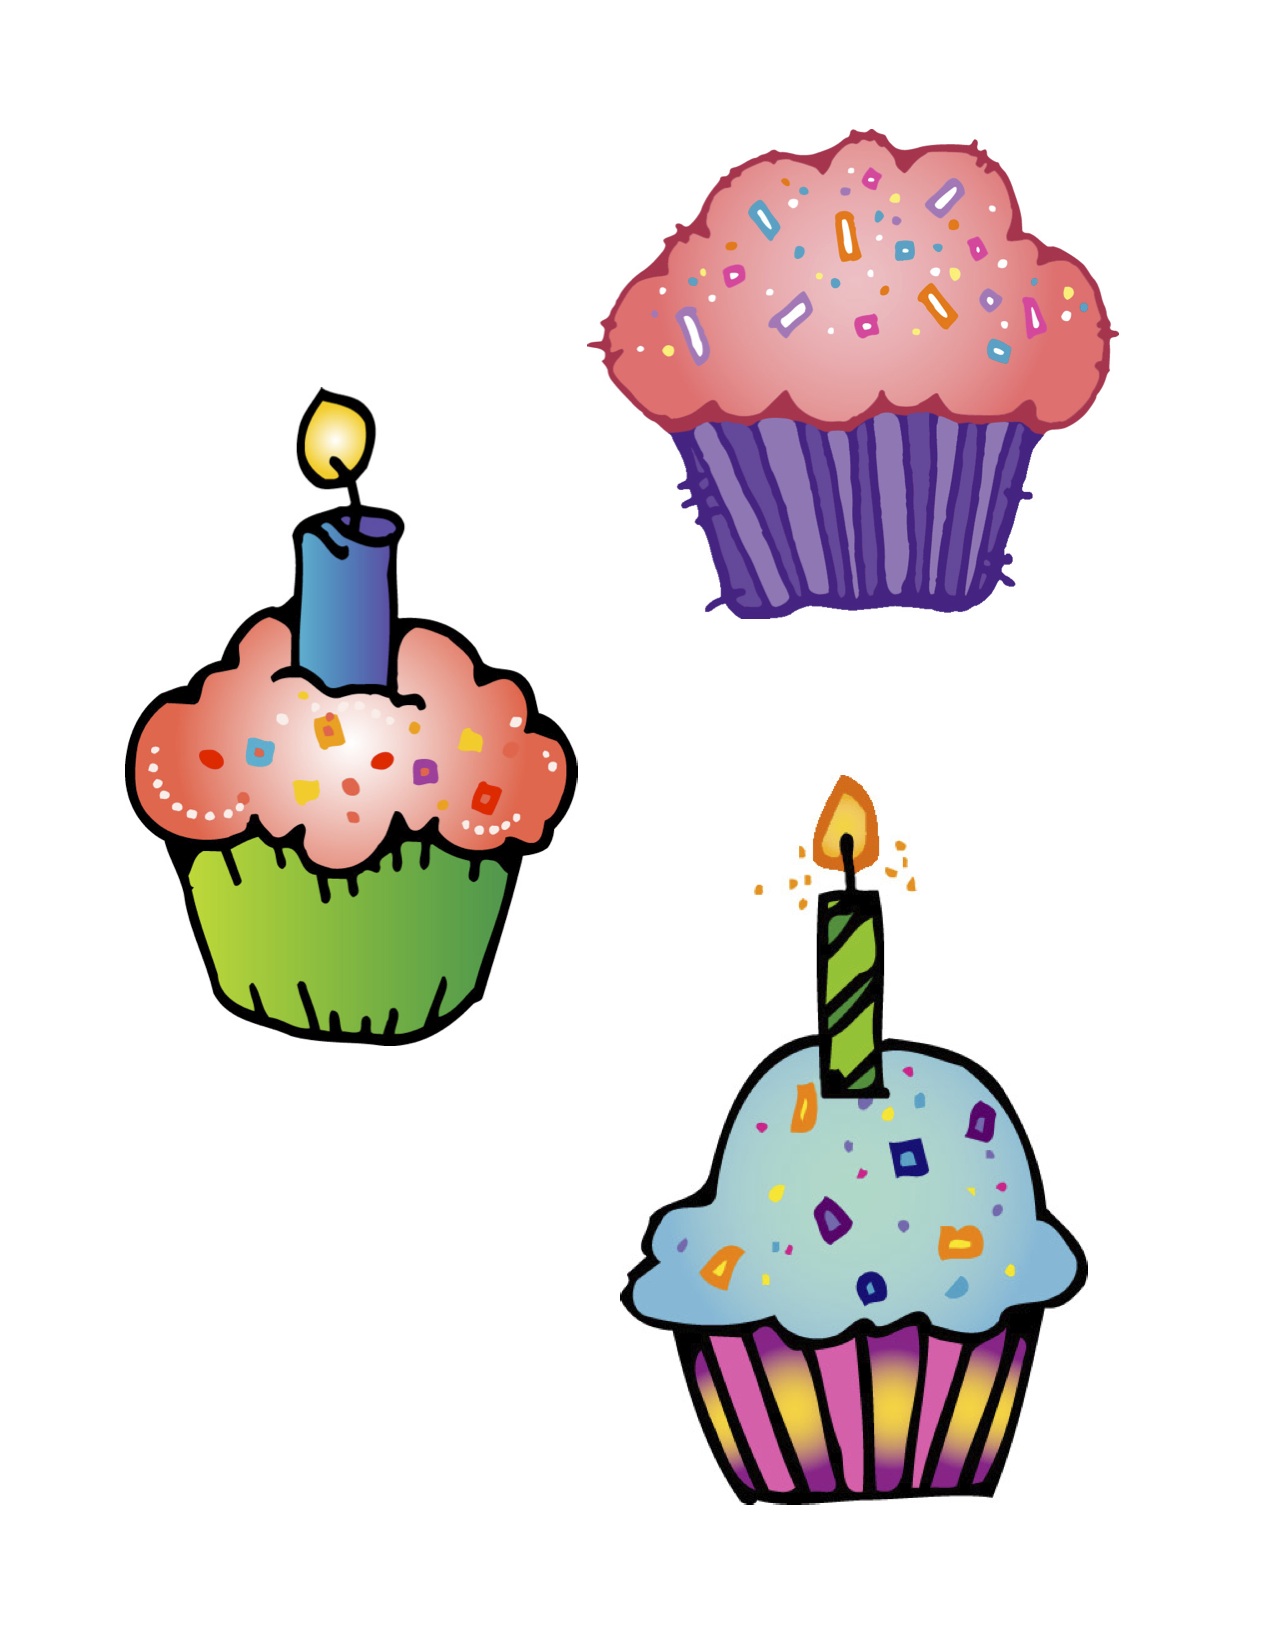 Birthday Cupcakes Clipart | Clipart library - Free Clipart Images